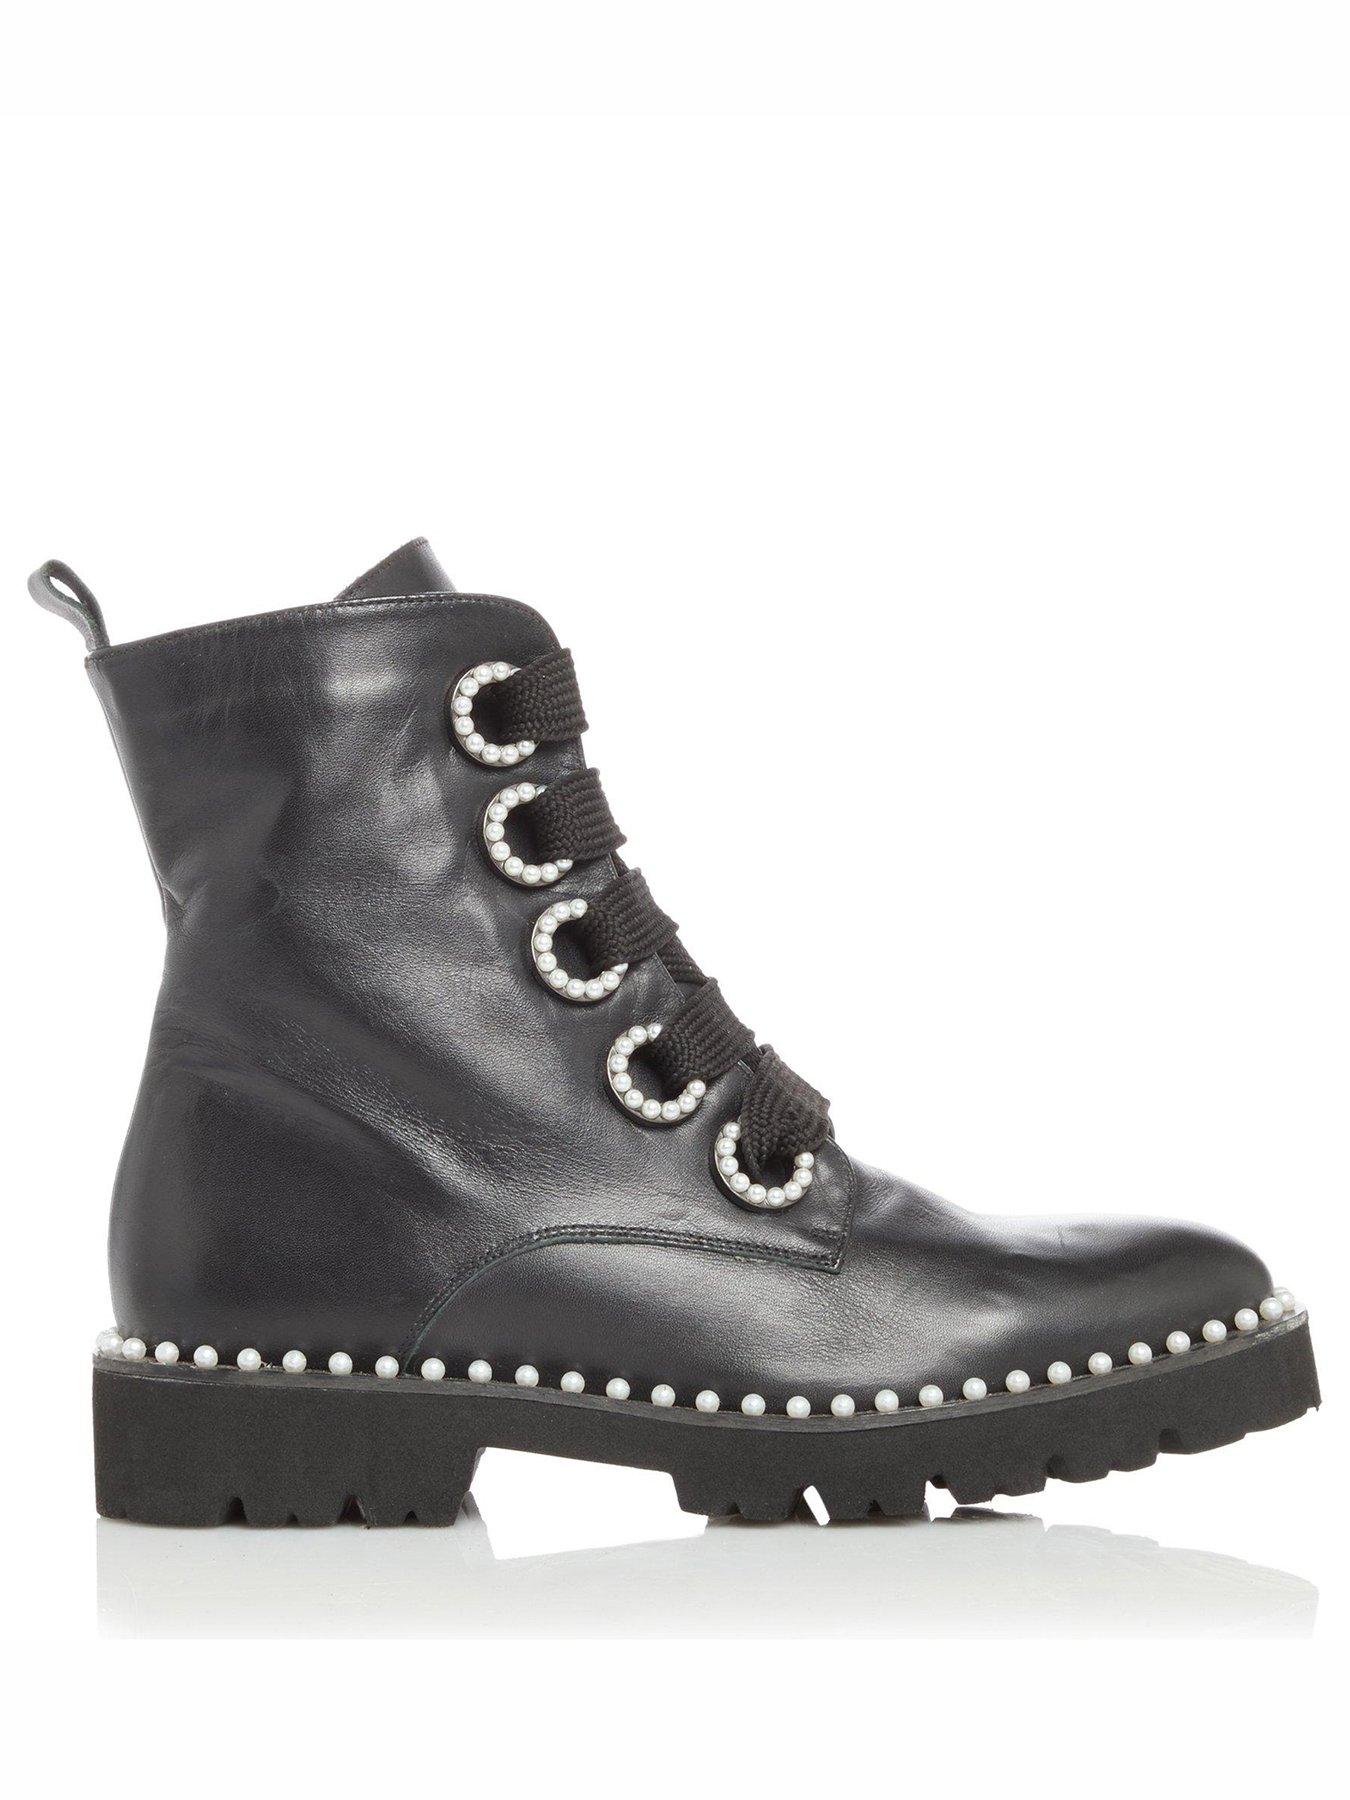 Dune London Purla Leather Pearl Eyelet Biker Ankle Boot - Black | very ...